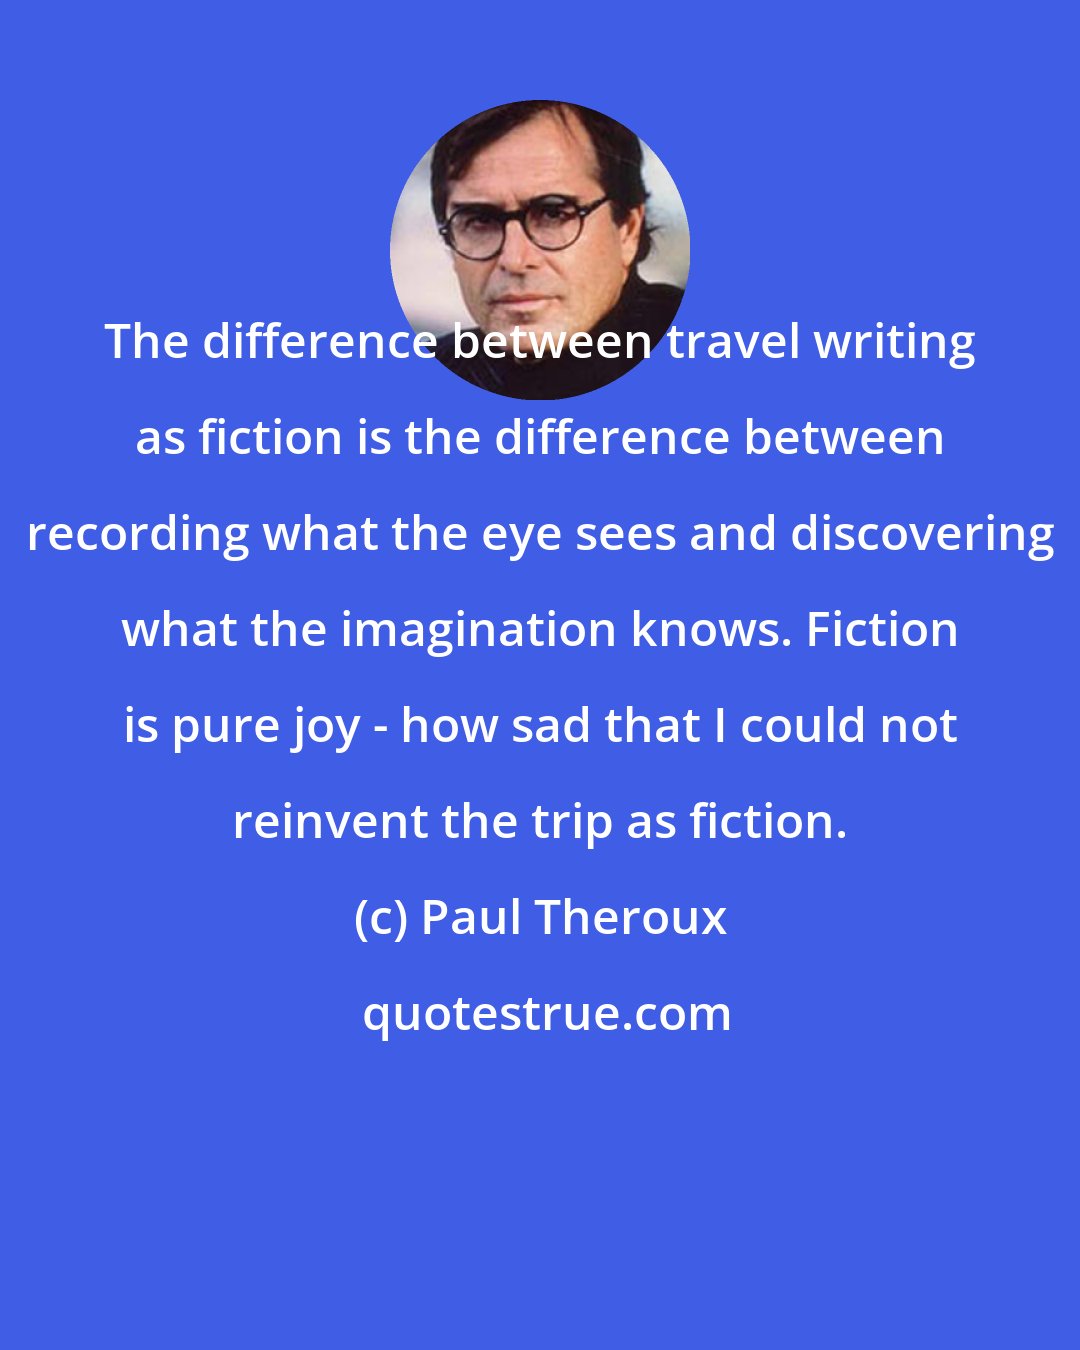 Paul Theroux: The difference between travel writing as fiction is the difference between recording what the eye sees and discovering what the imagination knows. Fiction is pure joy - how sad that I could not reinvent the trip as fiction.